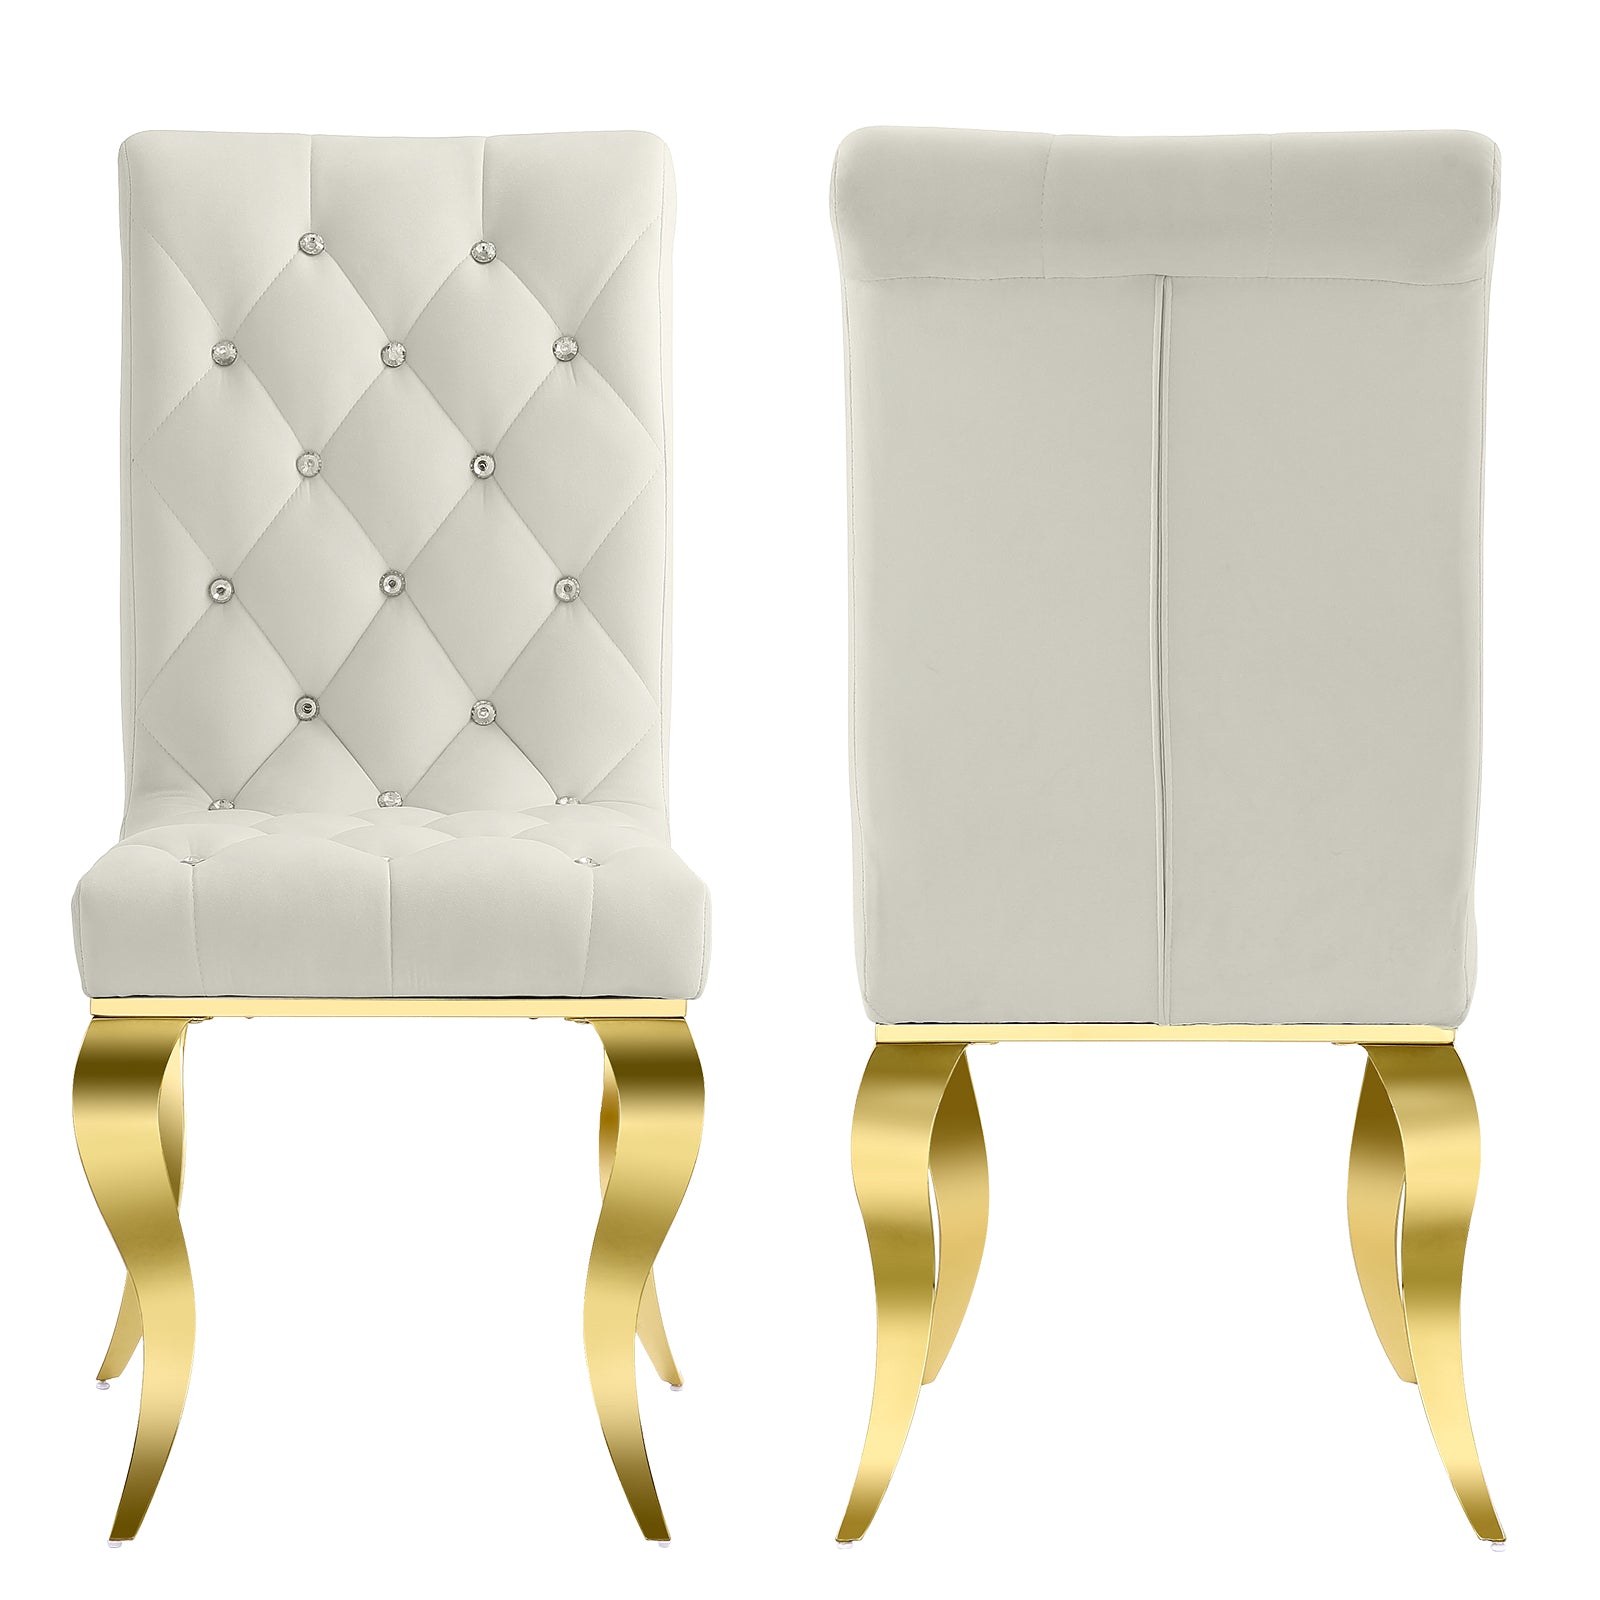 Adding a Touch of Luxury to Your Home: The Elegance of White and Gold Velvet Dining Chairs